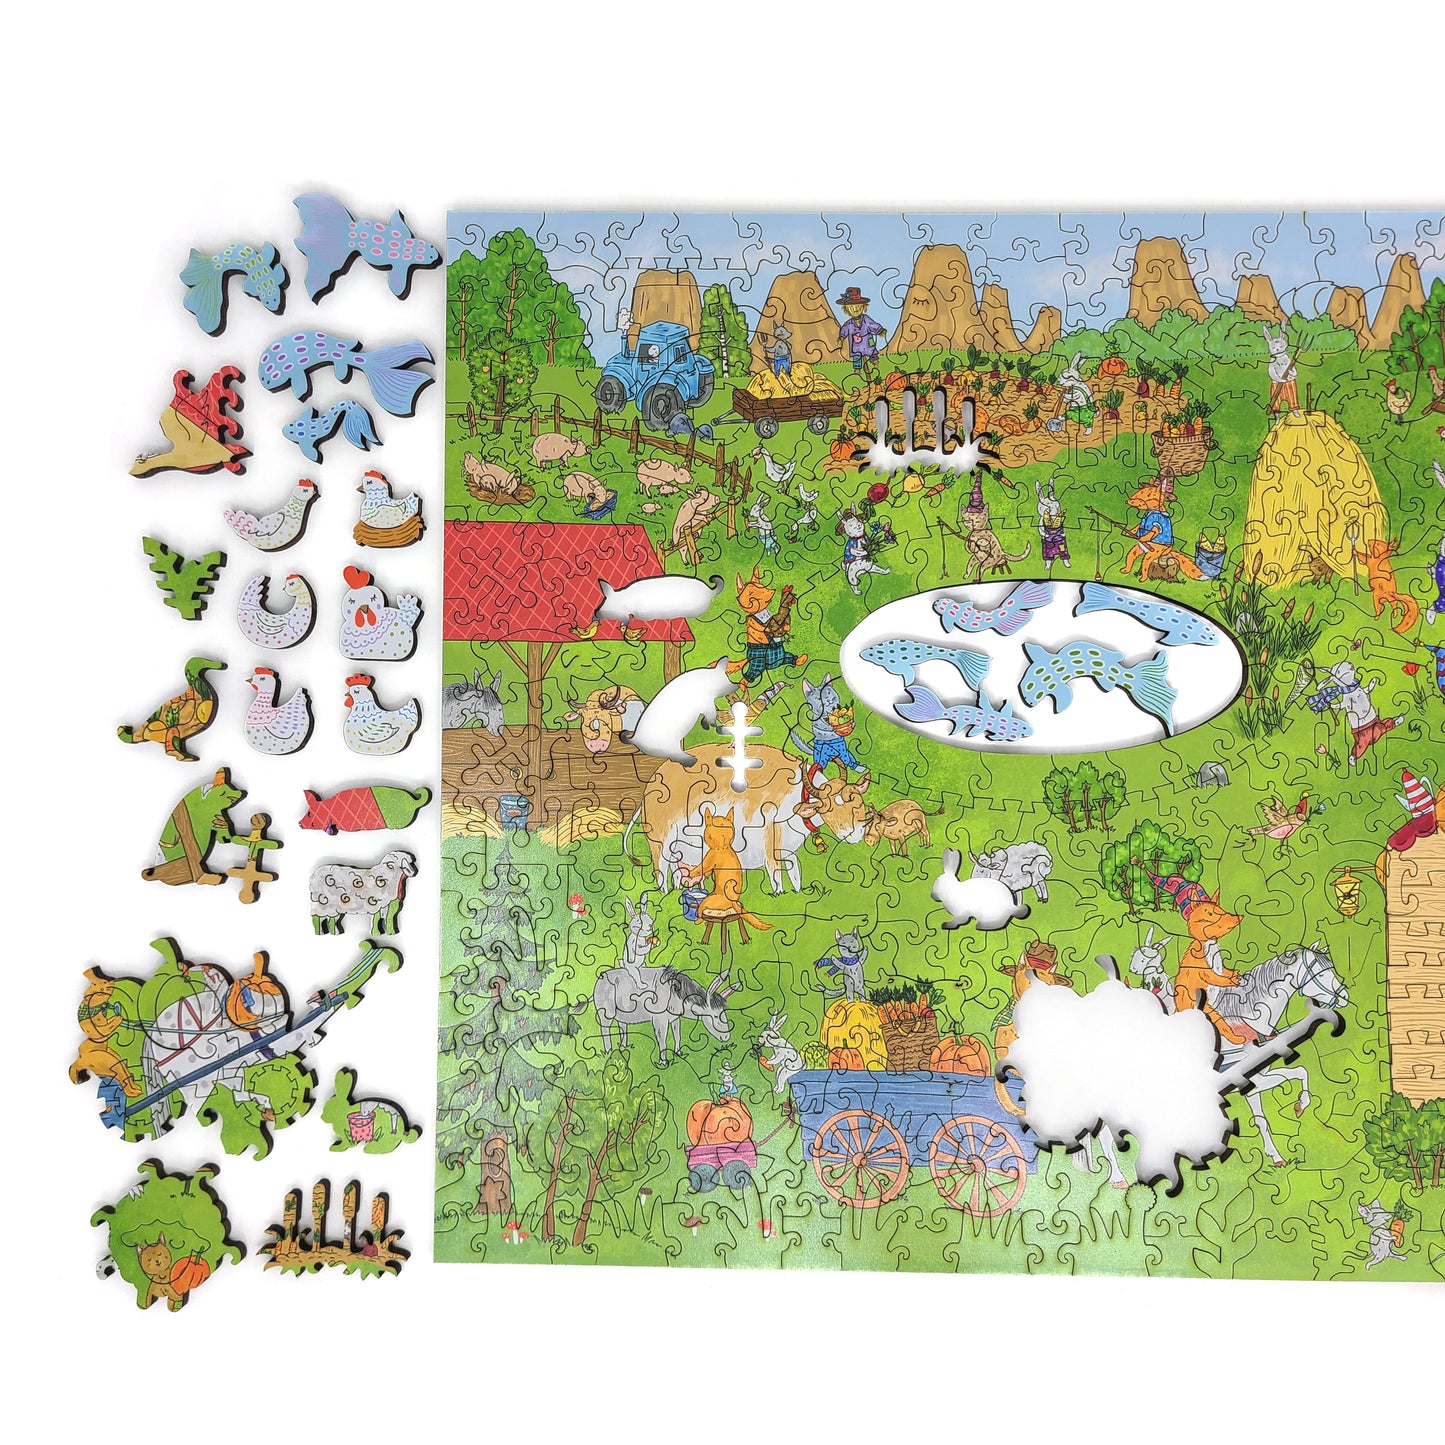 Wooden Jigsaw Puzzle for Adults - Smart Puzzle with Smart Pieces - 440 Puzzle Pieces + 23 Smart Pieces - Funny Farm